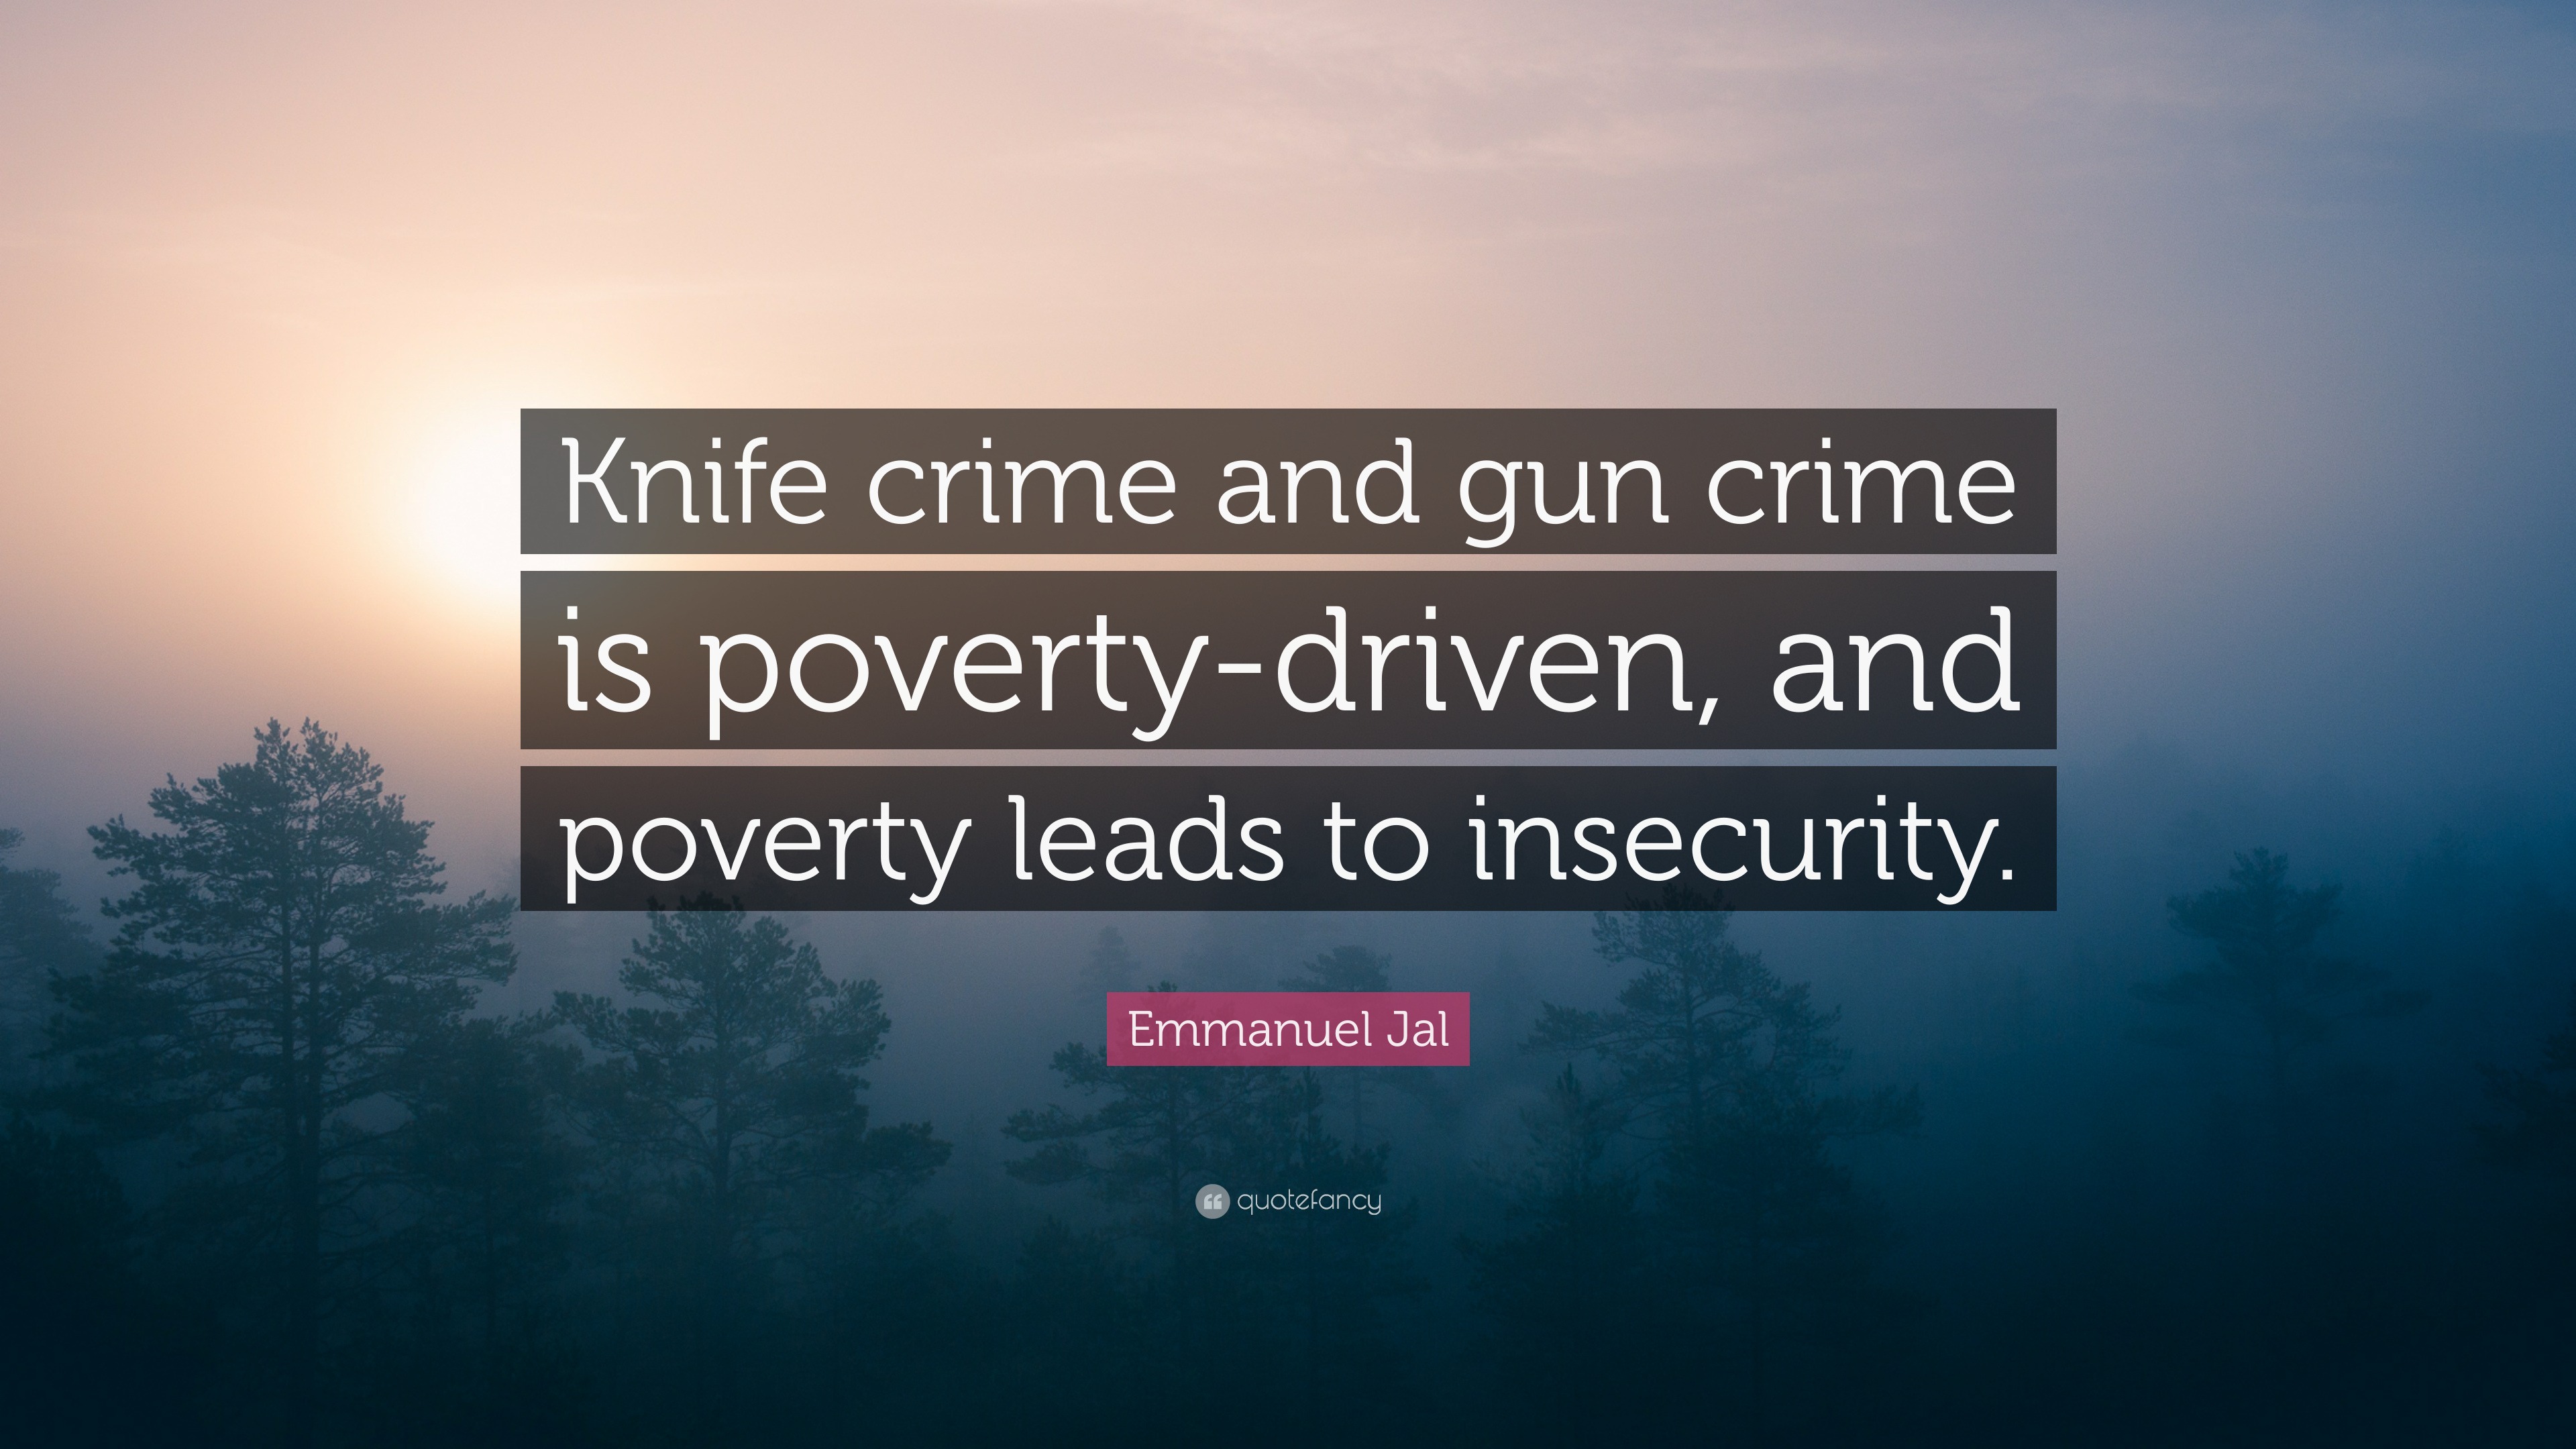 Emmanuel Jal Quote: “Knife crime and gun crime is poverty-driven, and